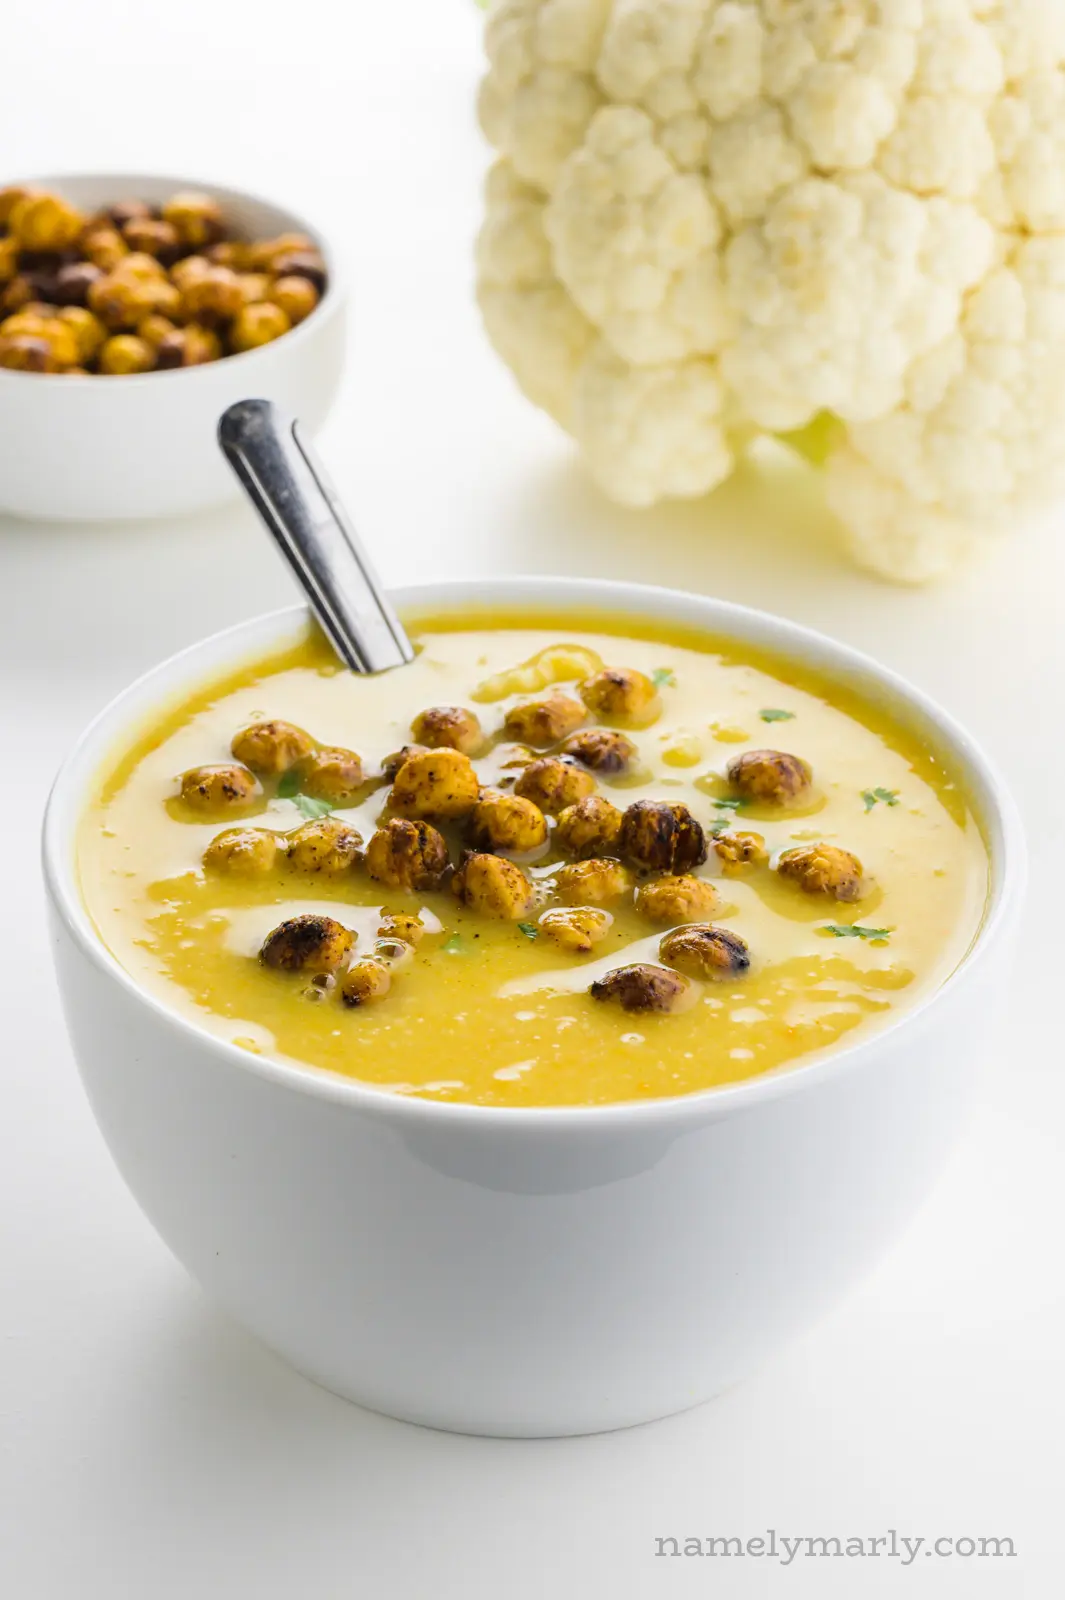 A bowl of soup with a bowl of roasted chickpeas behind it and a head of cauliflower.